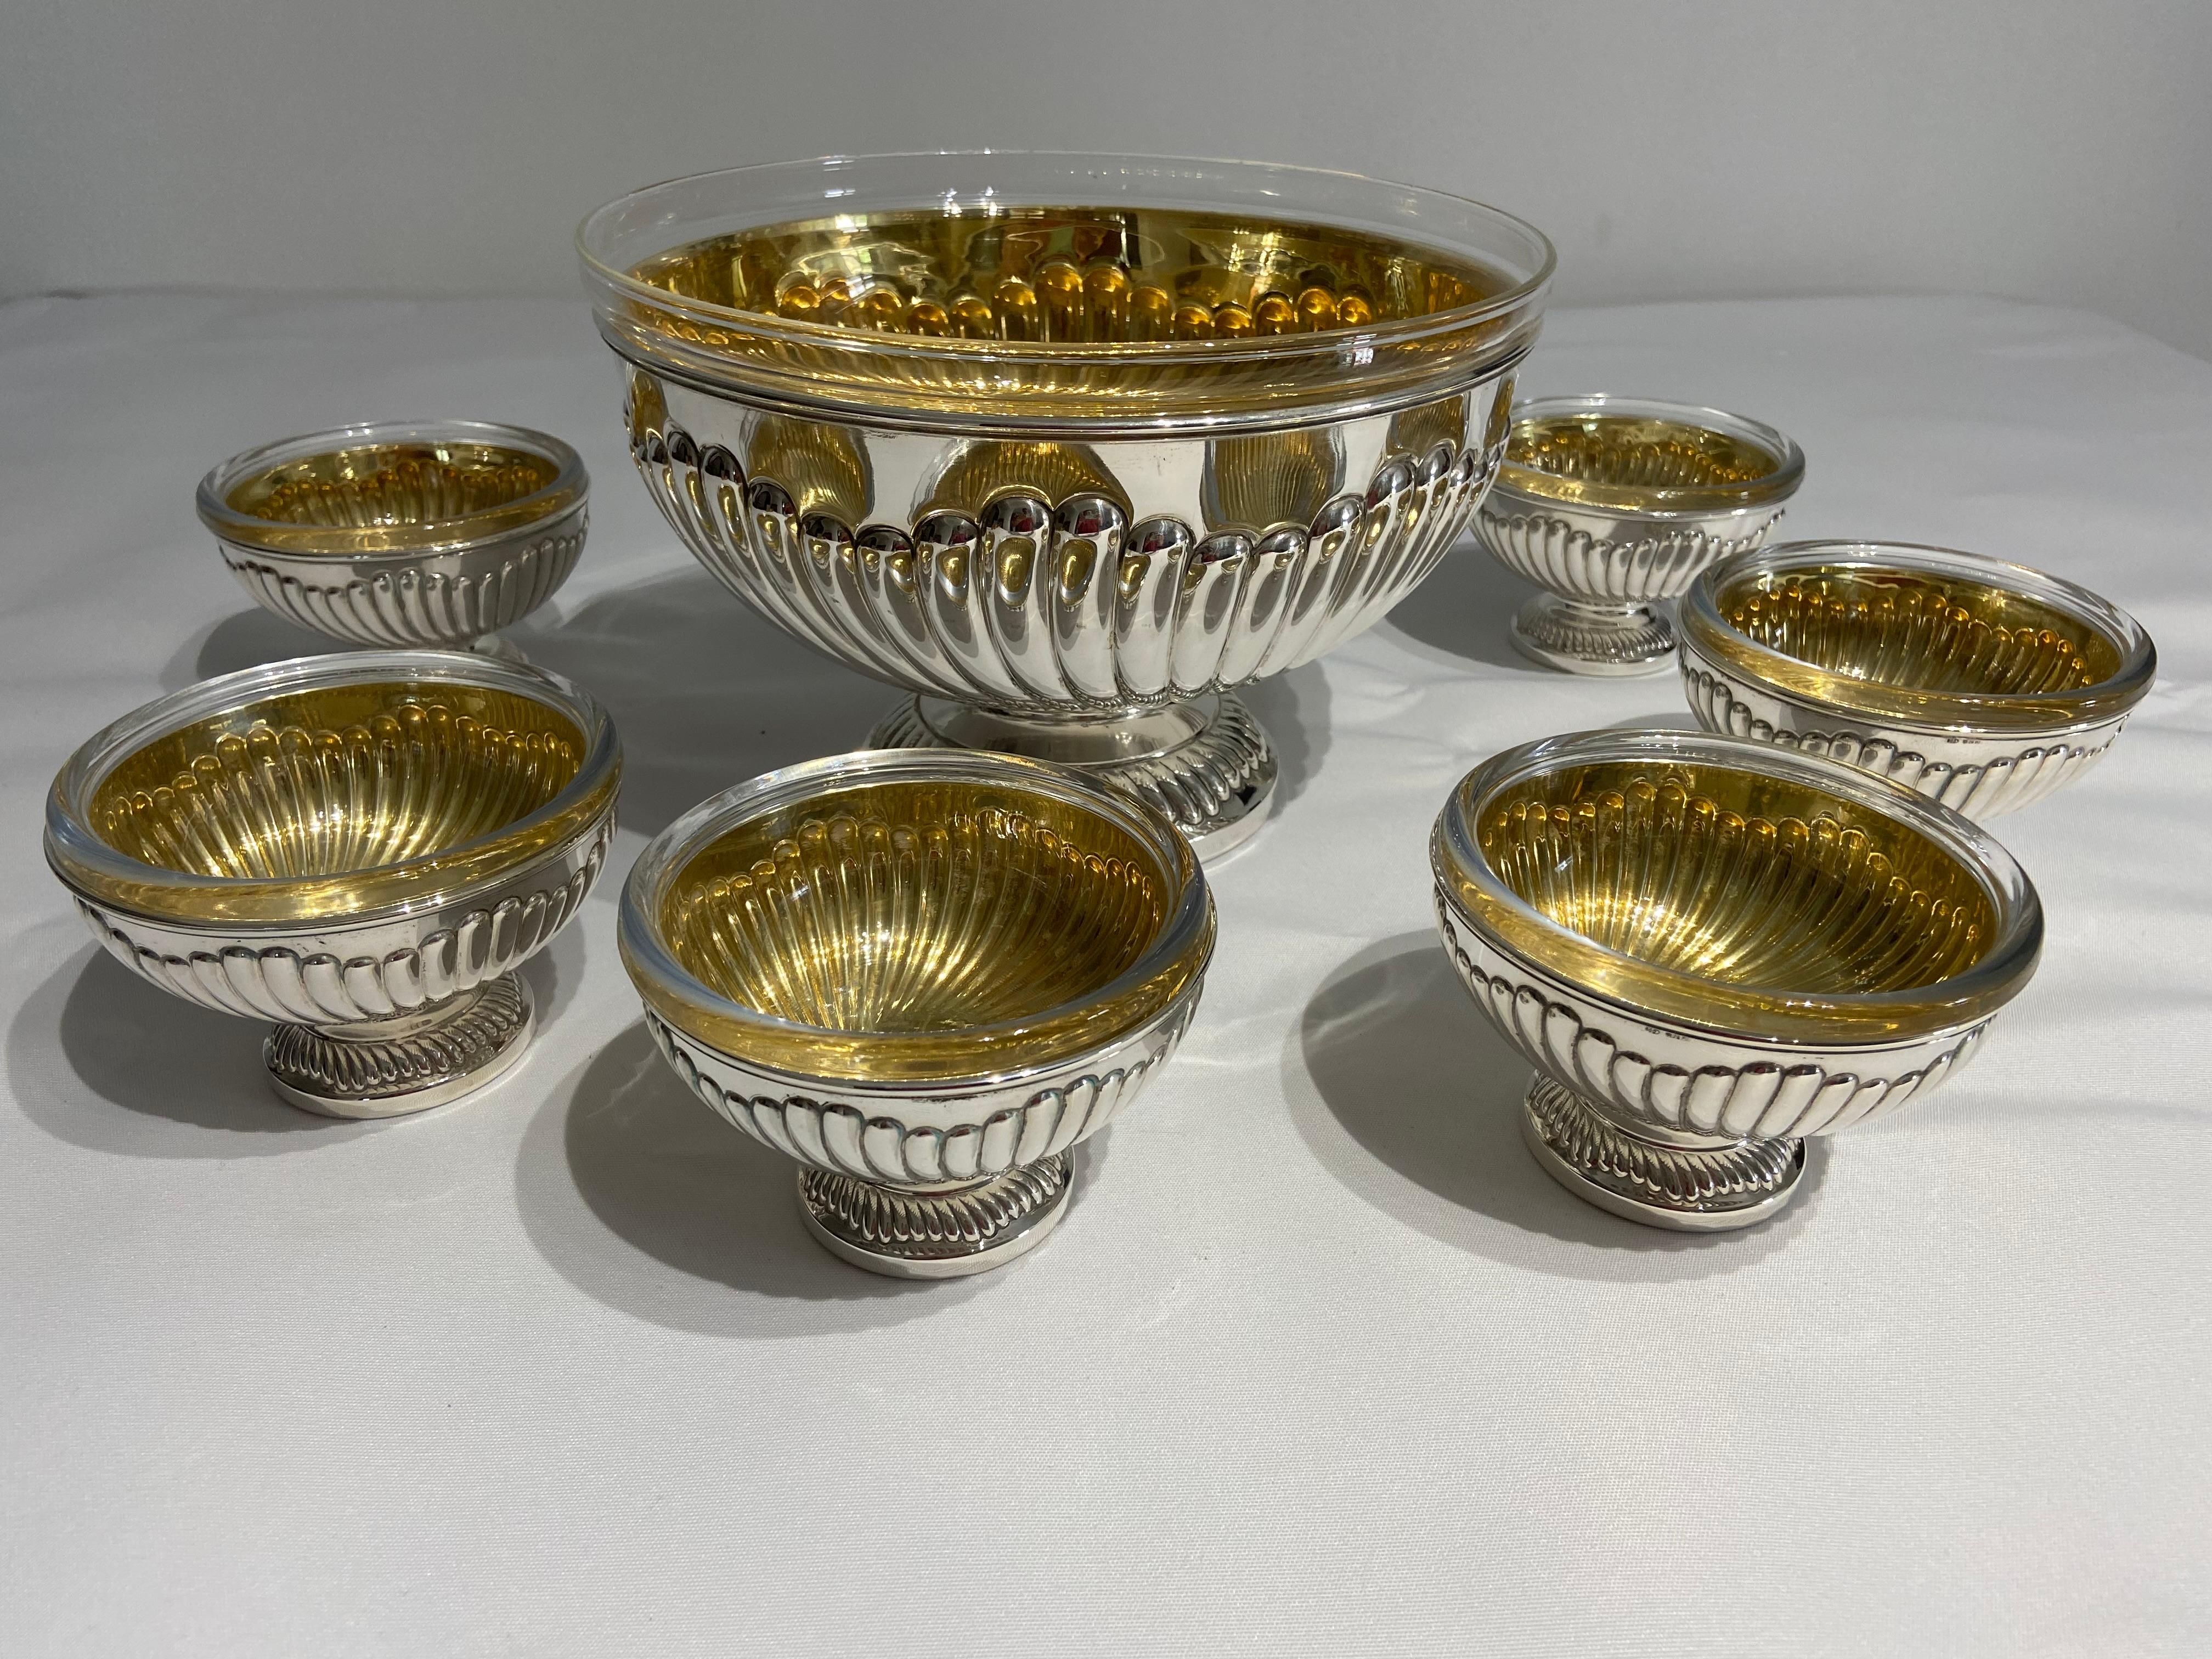 Each piece has a silver part and a glass bowl. The silver part has gilding on the inside.
The whole set is stamped with the stamps of the 800 silver and of the manufacturer.
The large bowl has a diameter of 24cm and is 14cm high.
The cups have a